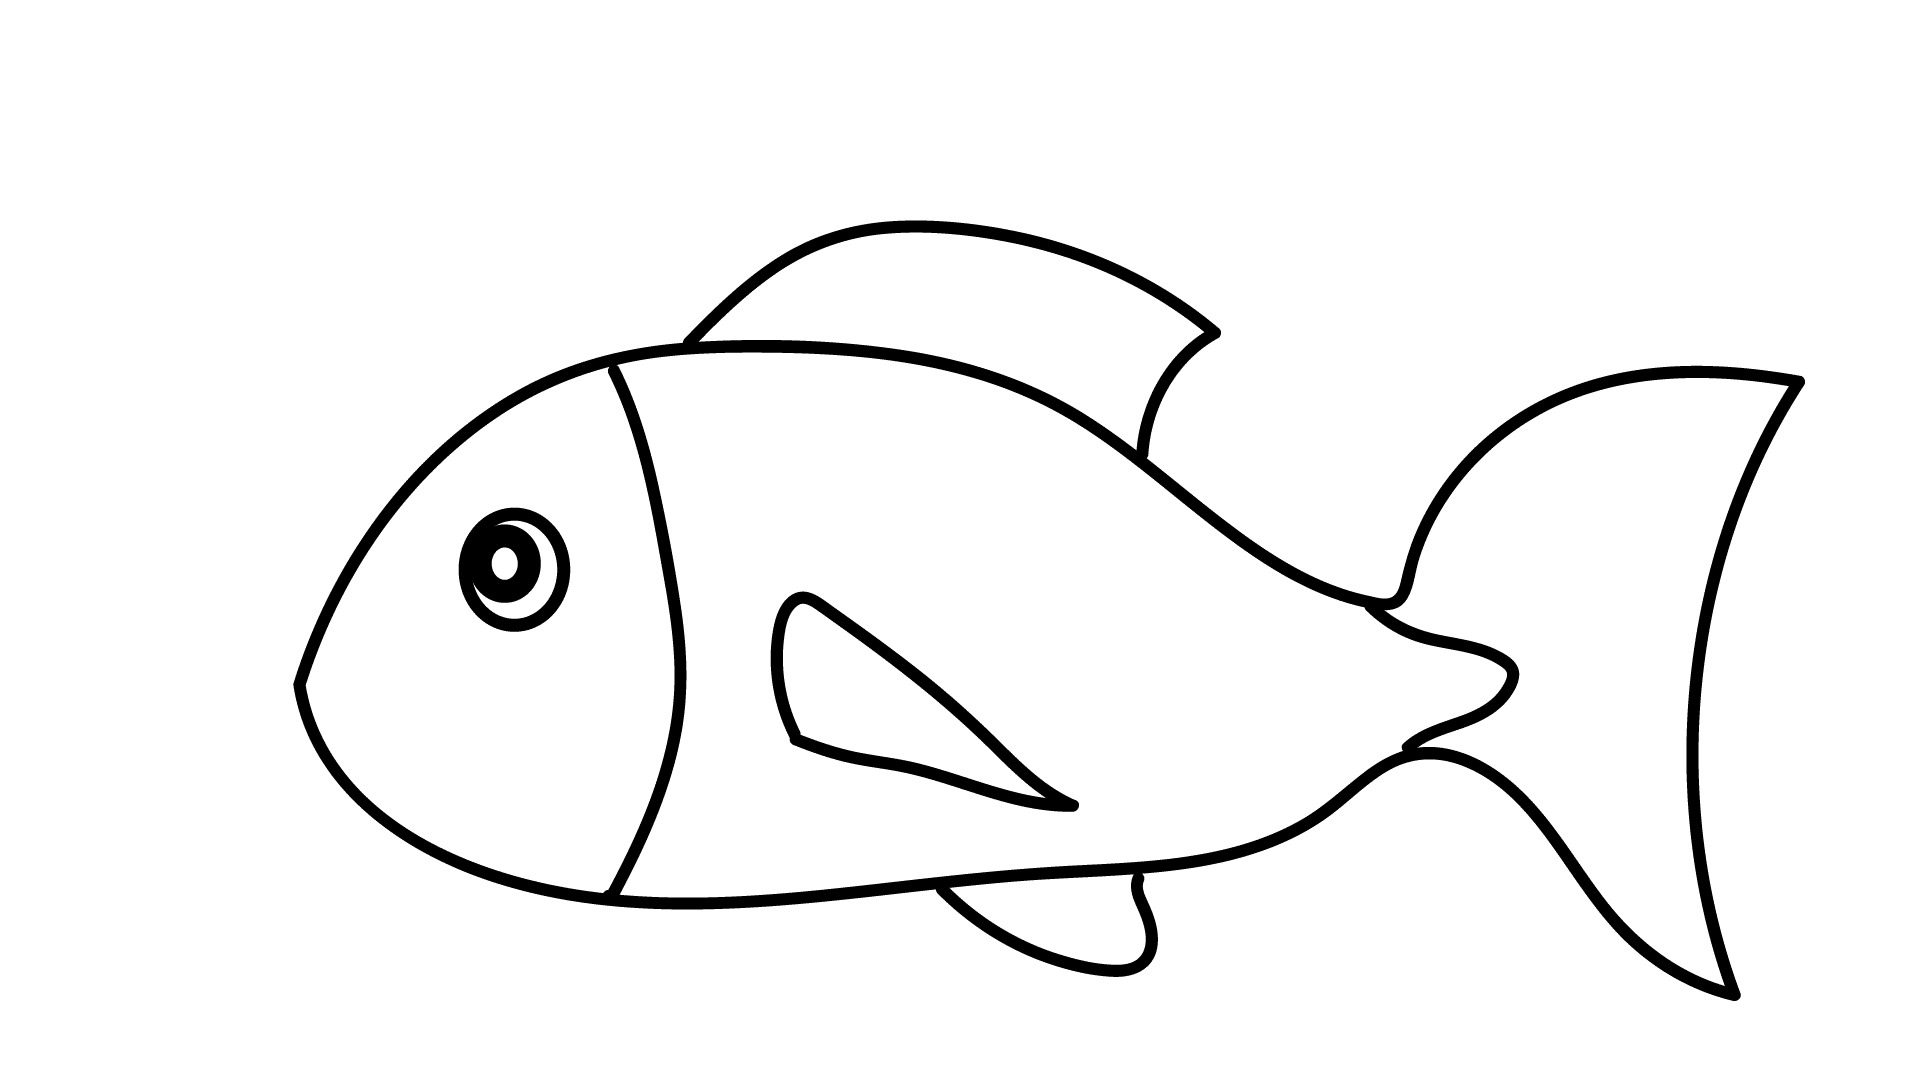 How to draw a fish - Step 4